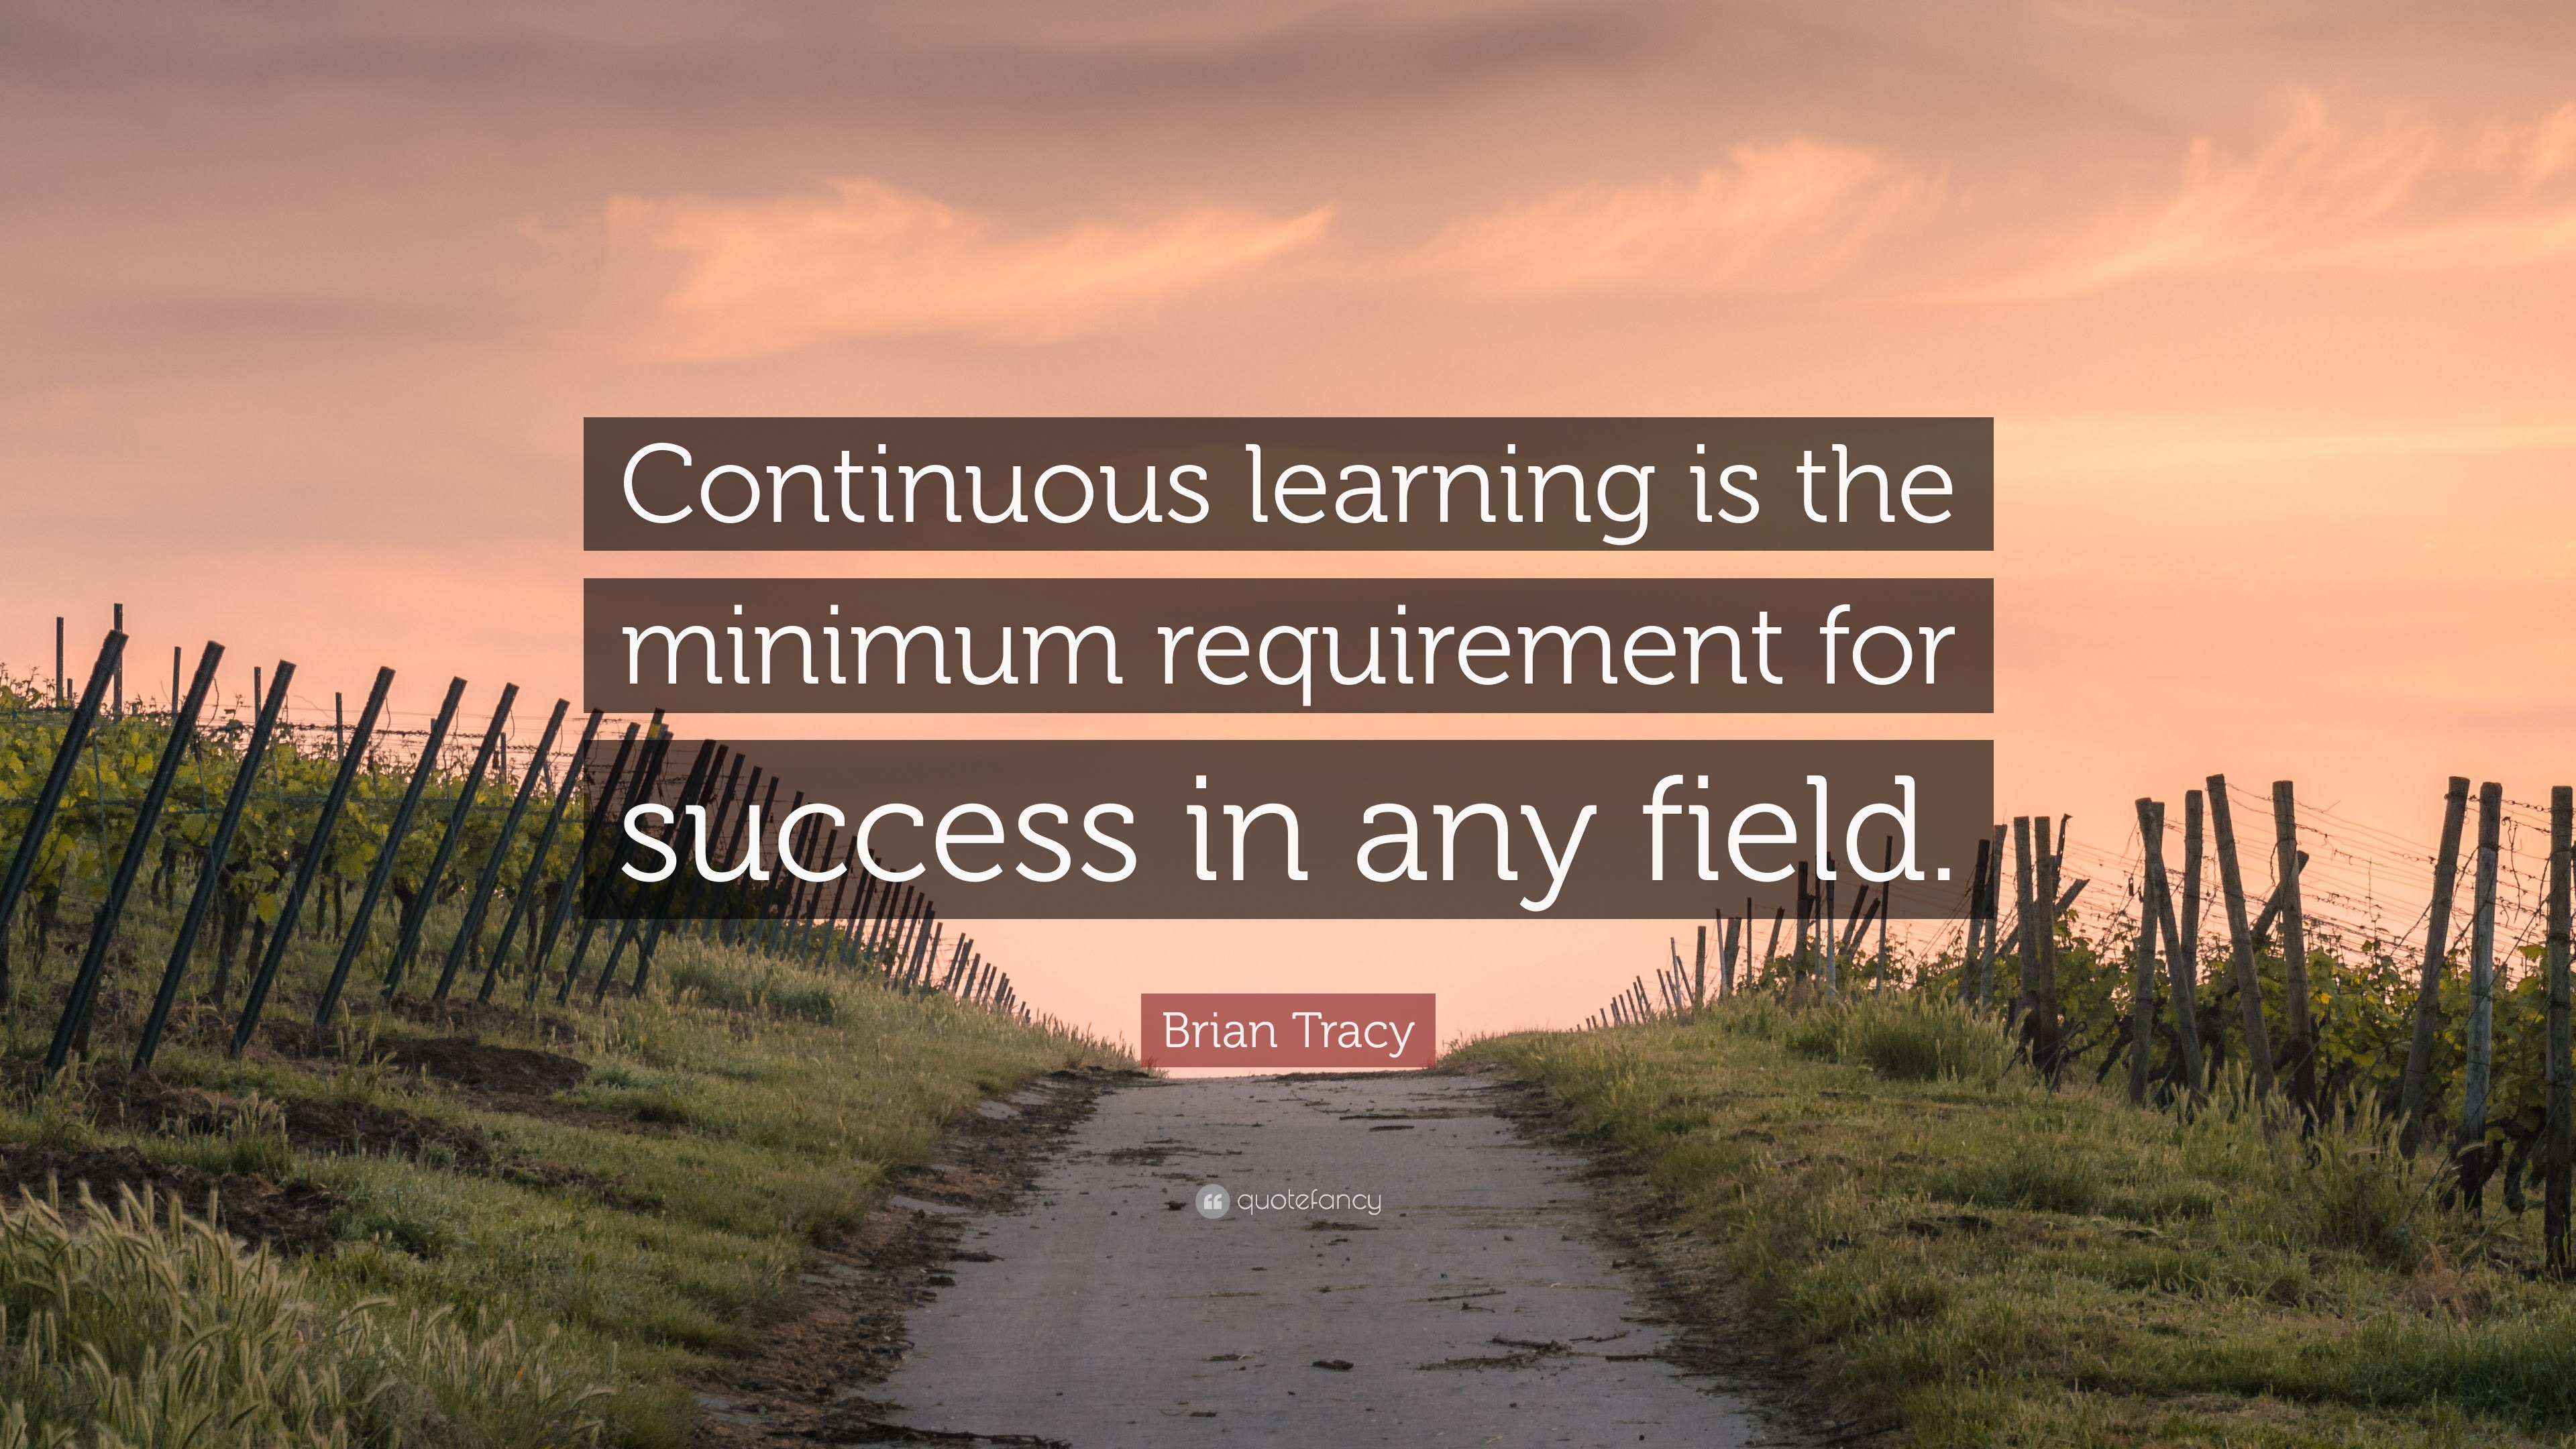 Best Continuous Learning Quotes in the world Don t miss out 